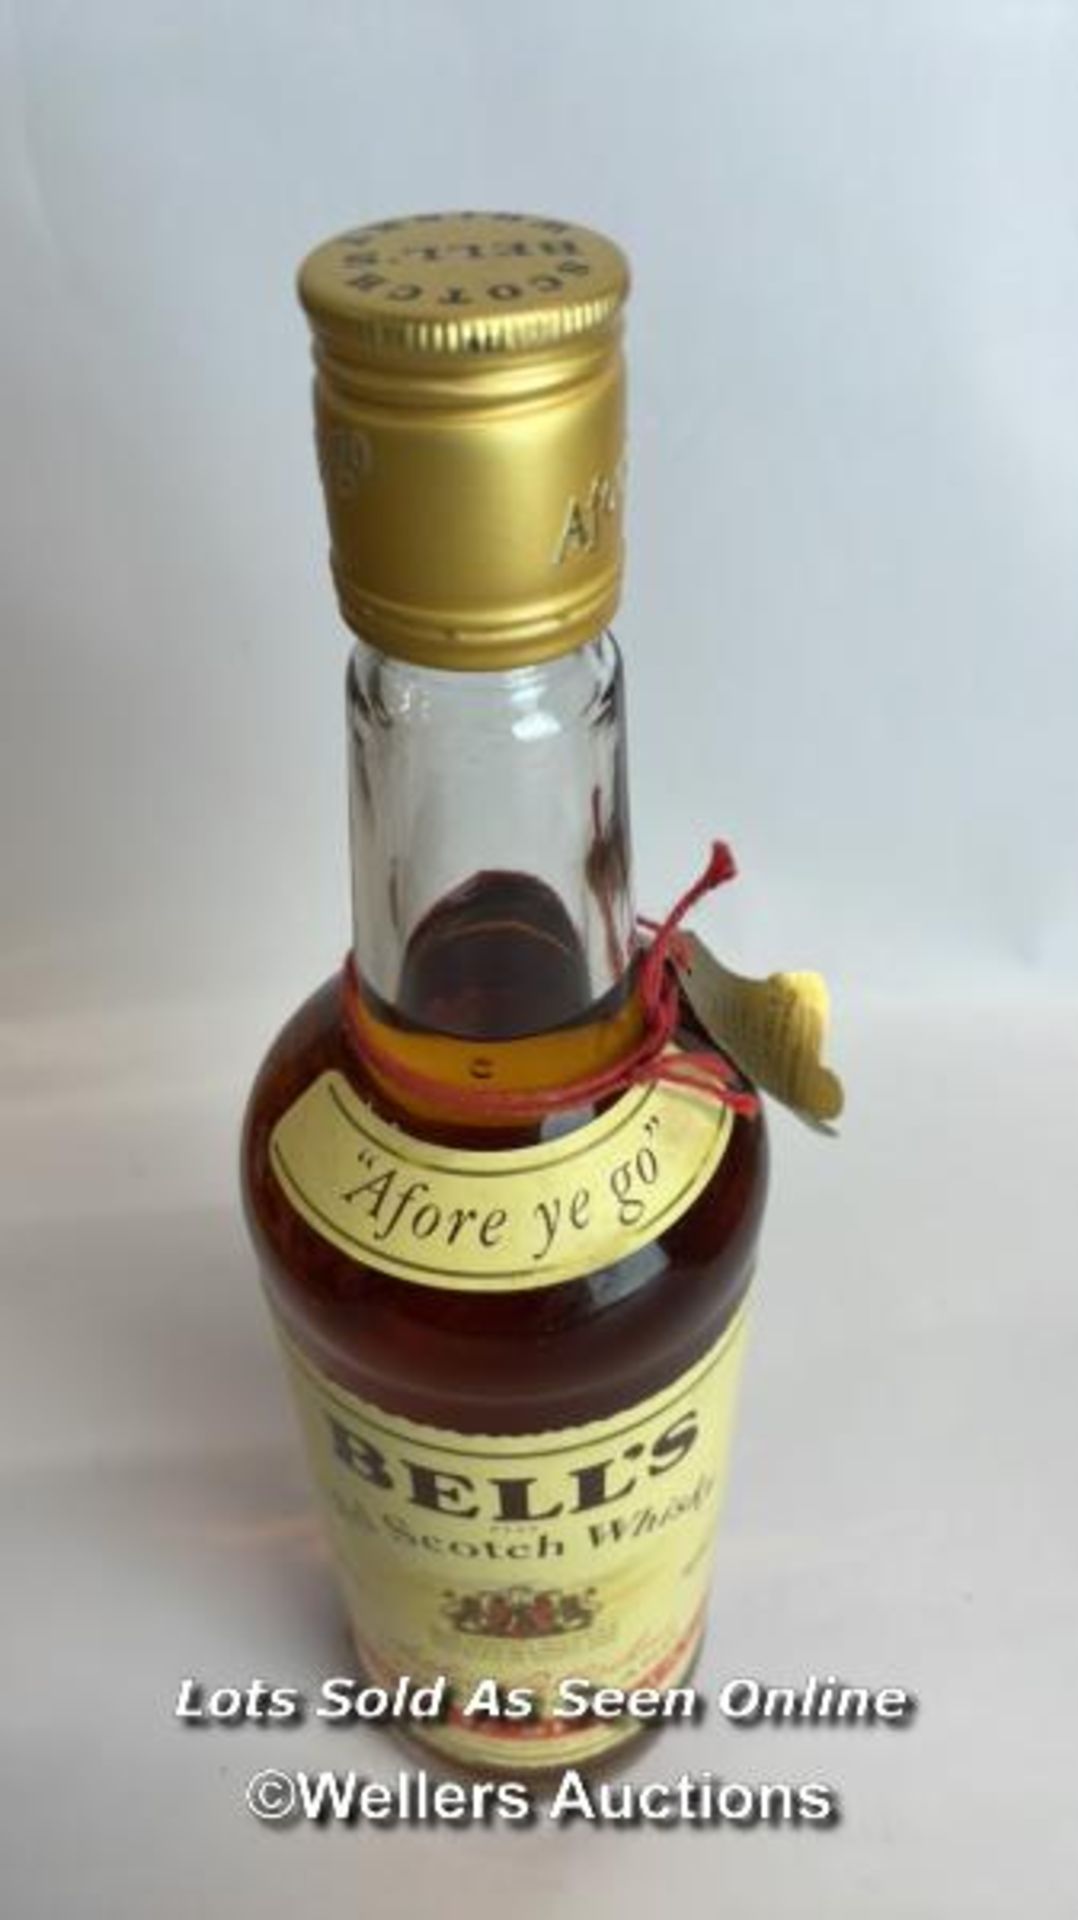 Bell's Extra Special Old Scotch Whisky, "Afore Ye Go", 75cl, 43% vol, In original box / Please see - Bild 11 aus 12